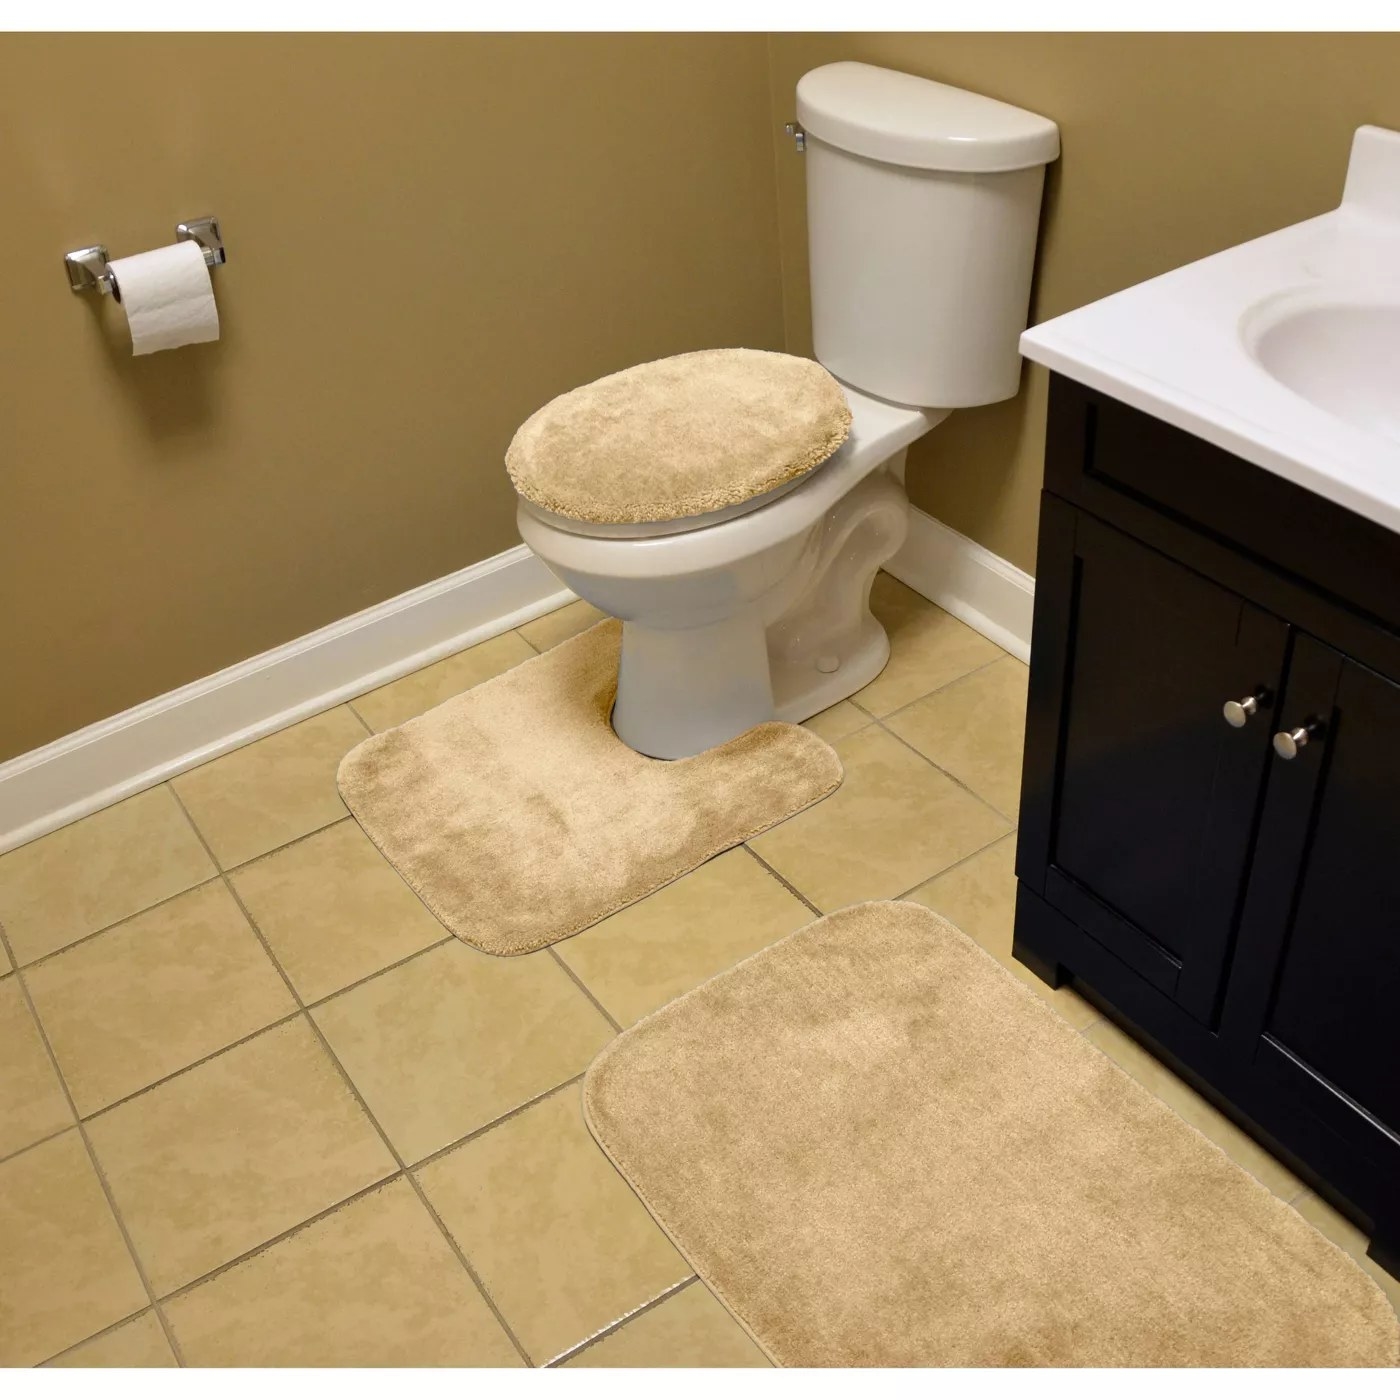 The rugs fitted on top of the toilet seat and placed in front of the toilet and sink